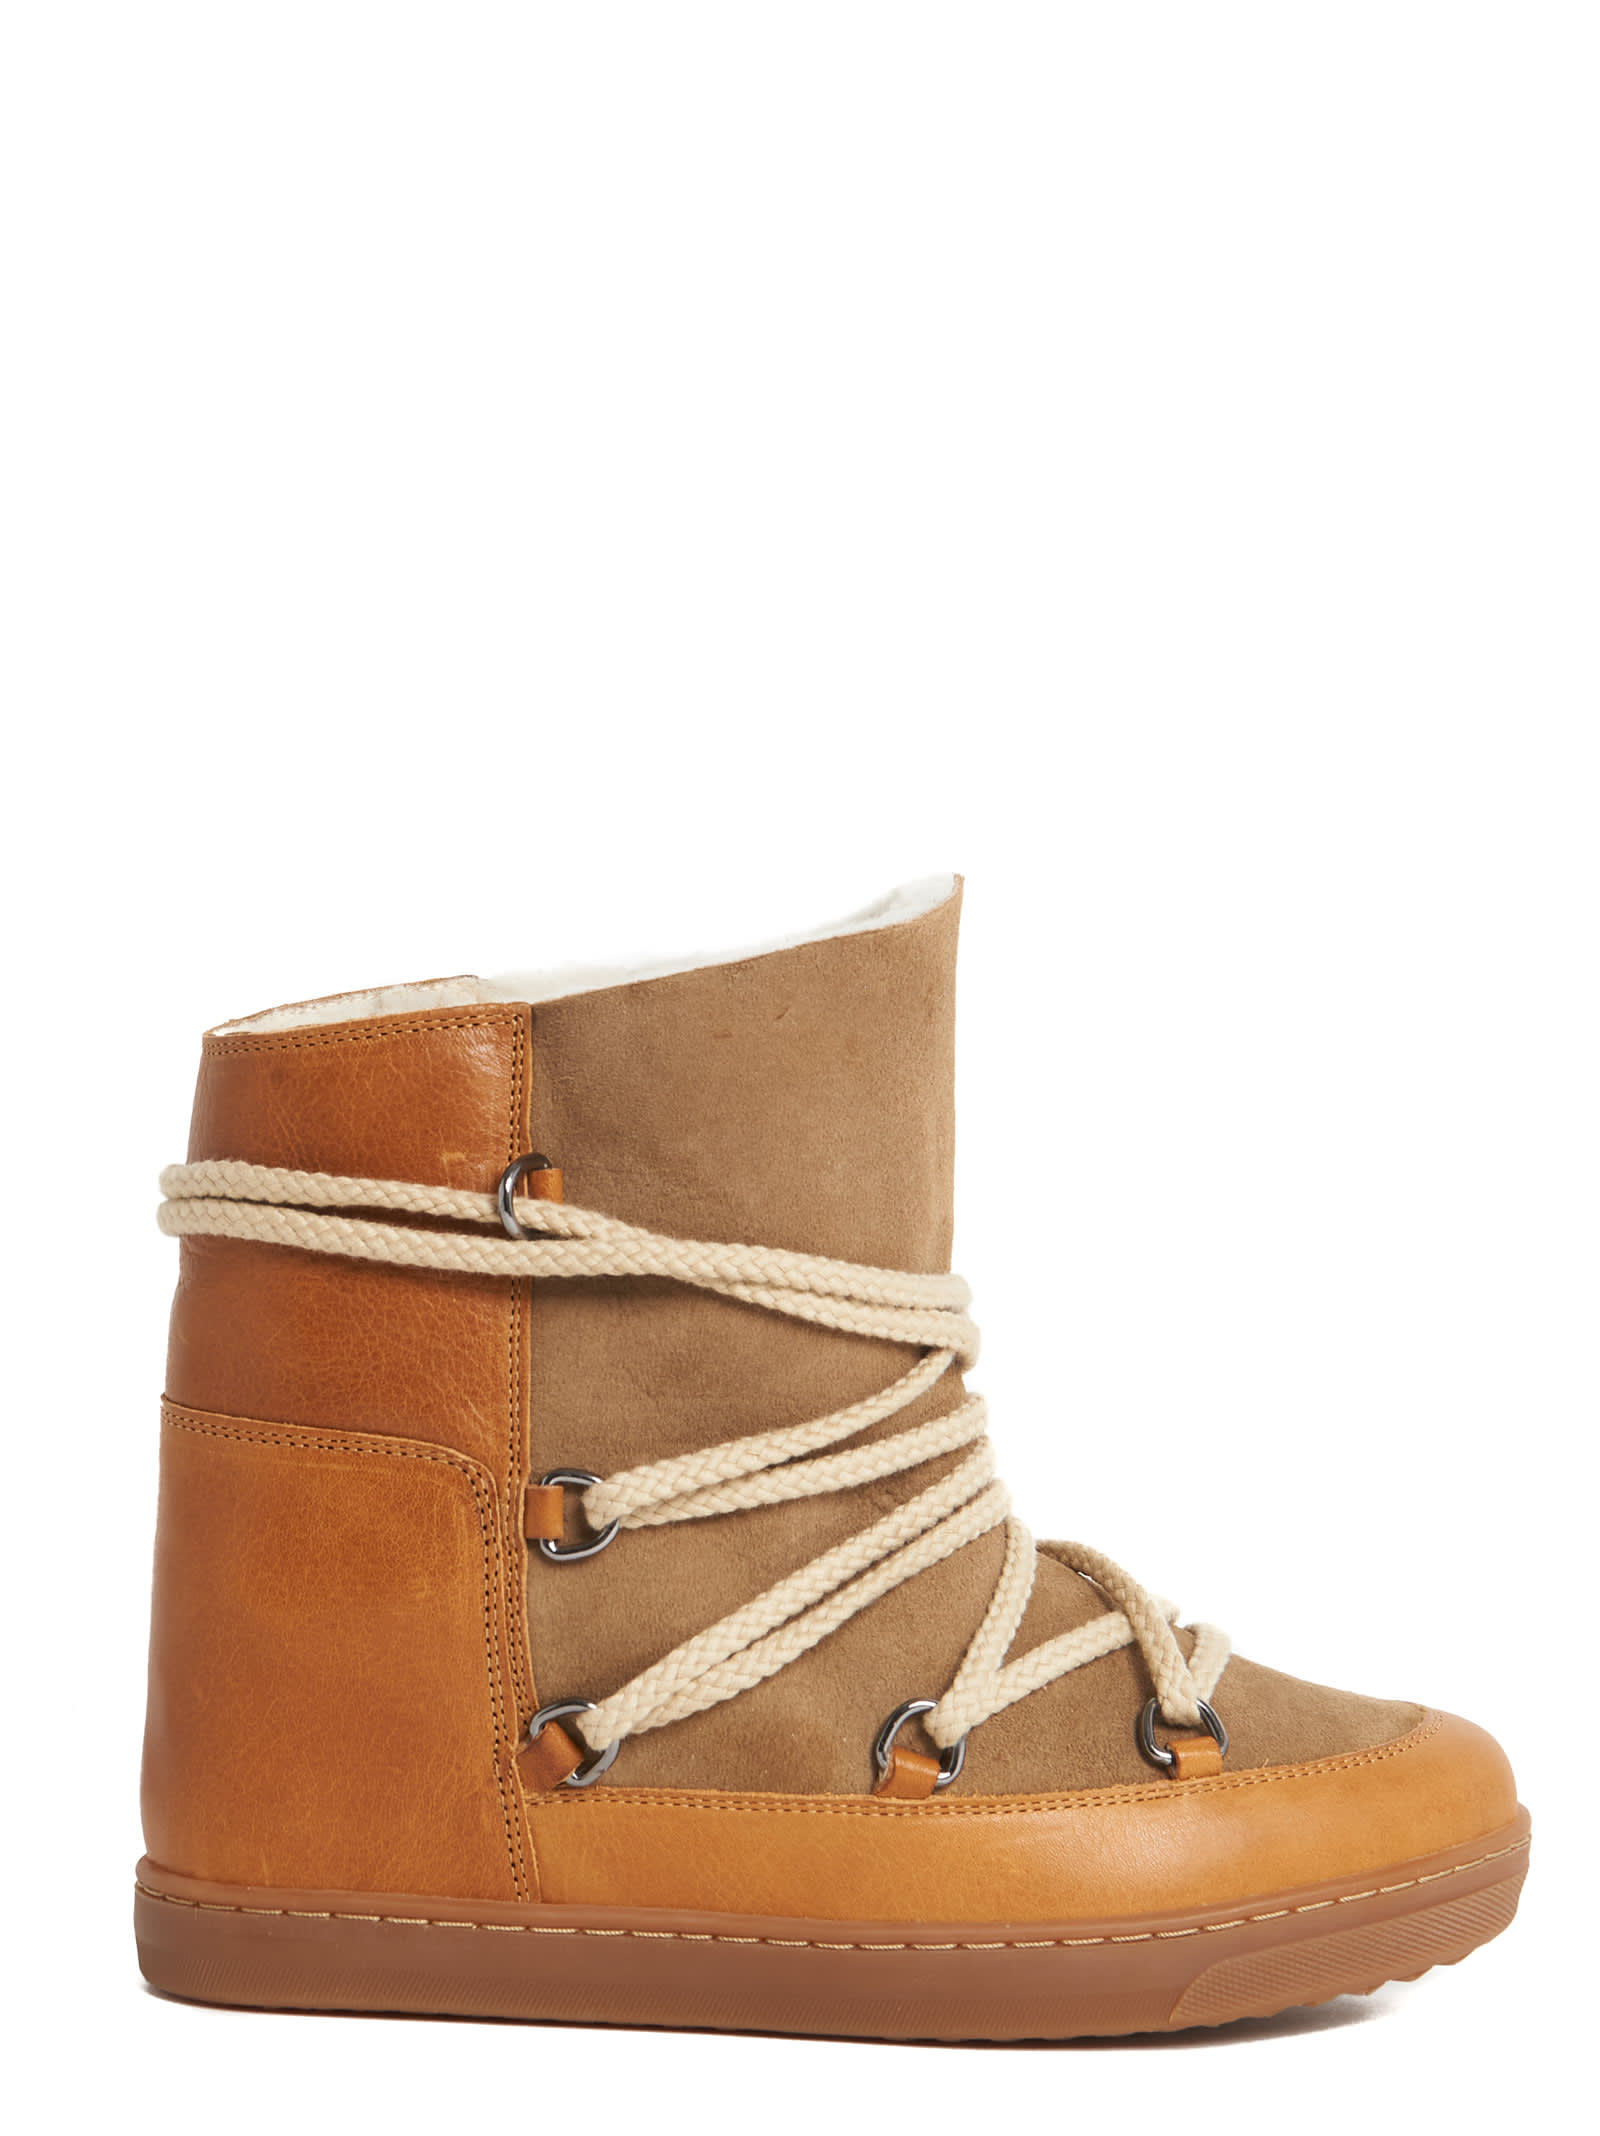 isabel marant nowles boots sale